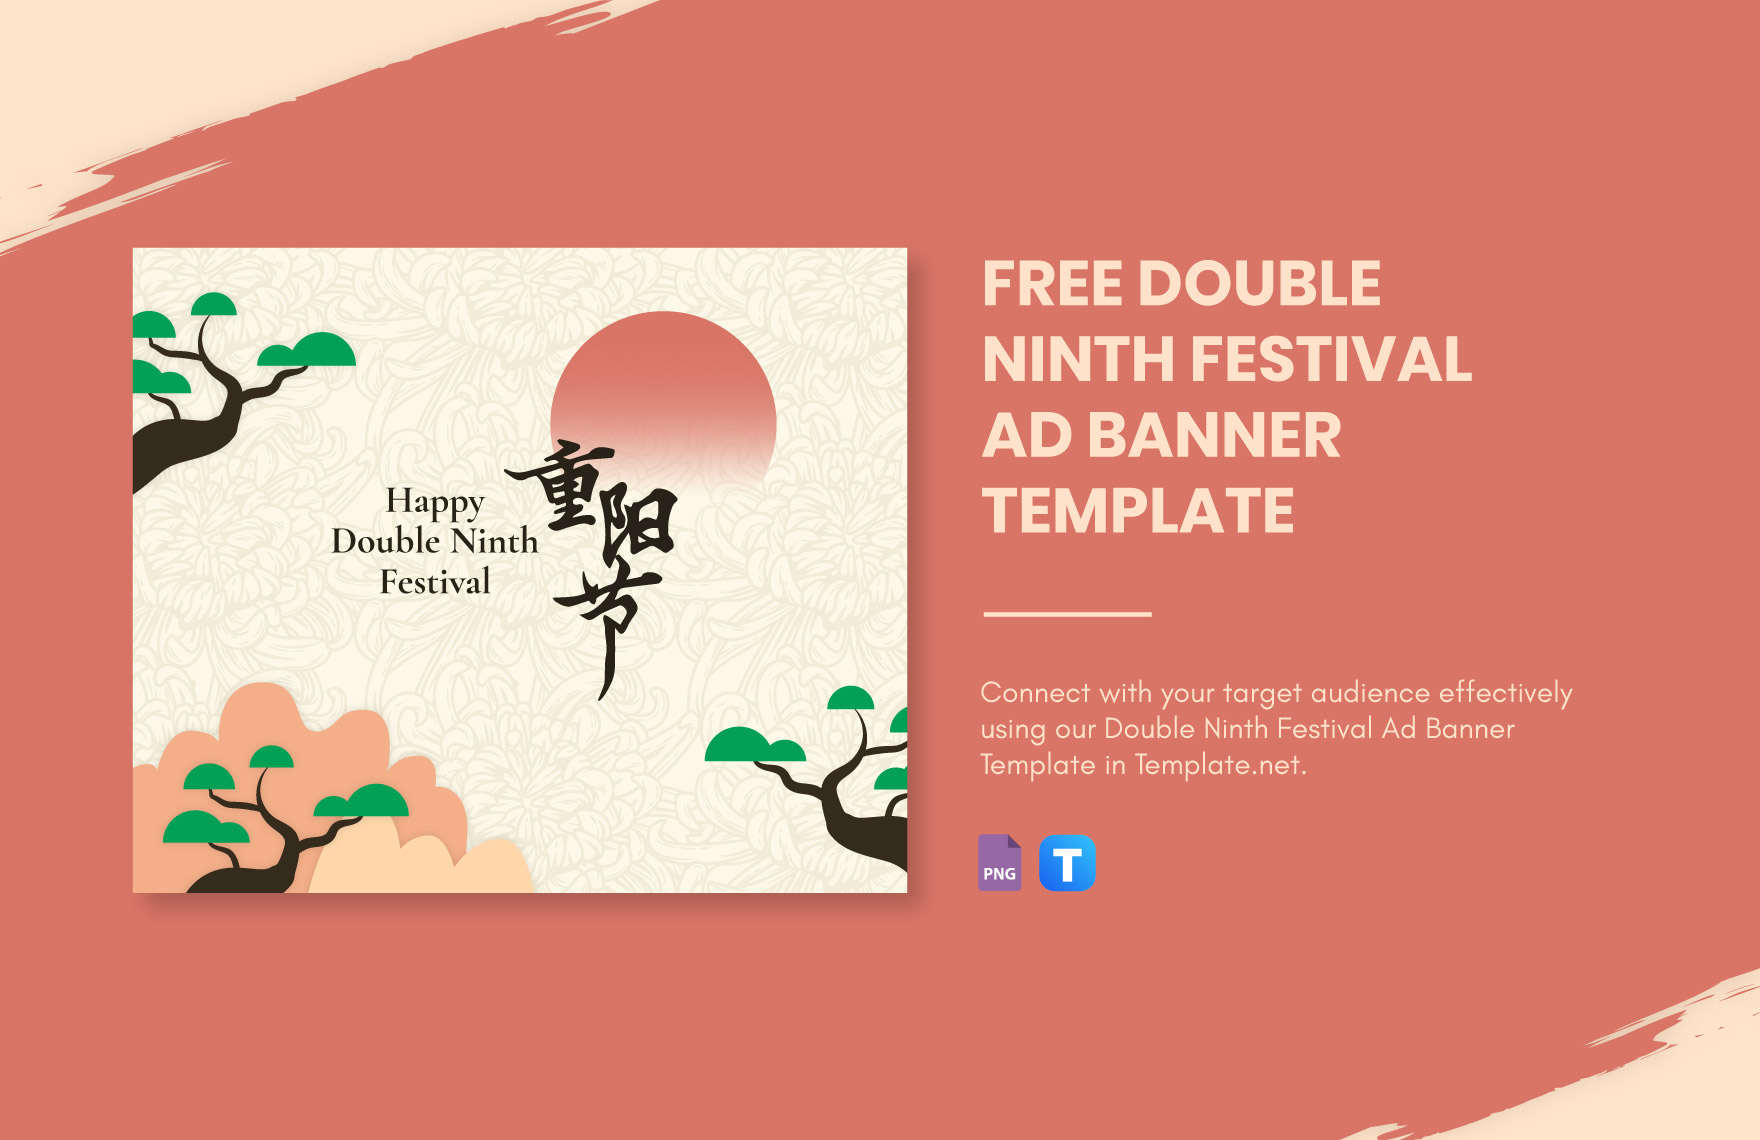 Free Double Ninth Festival Ad Banner Template in PNG